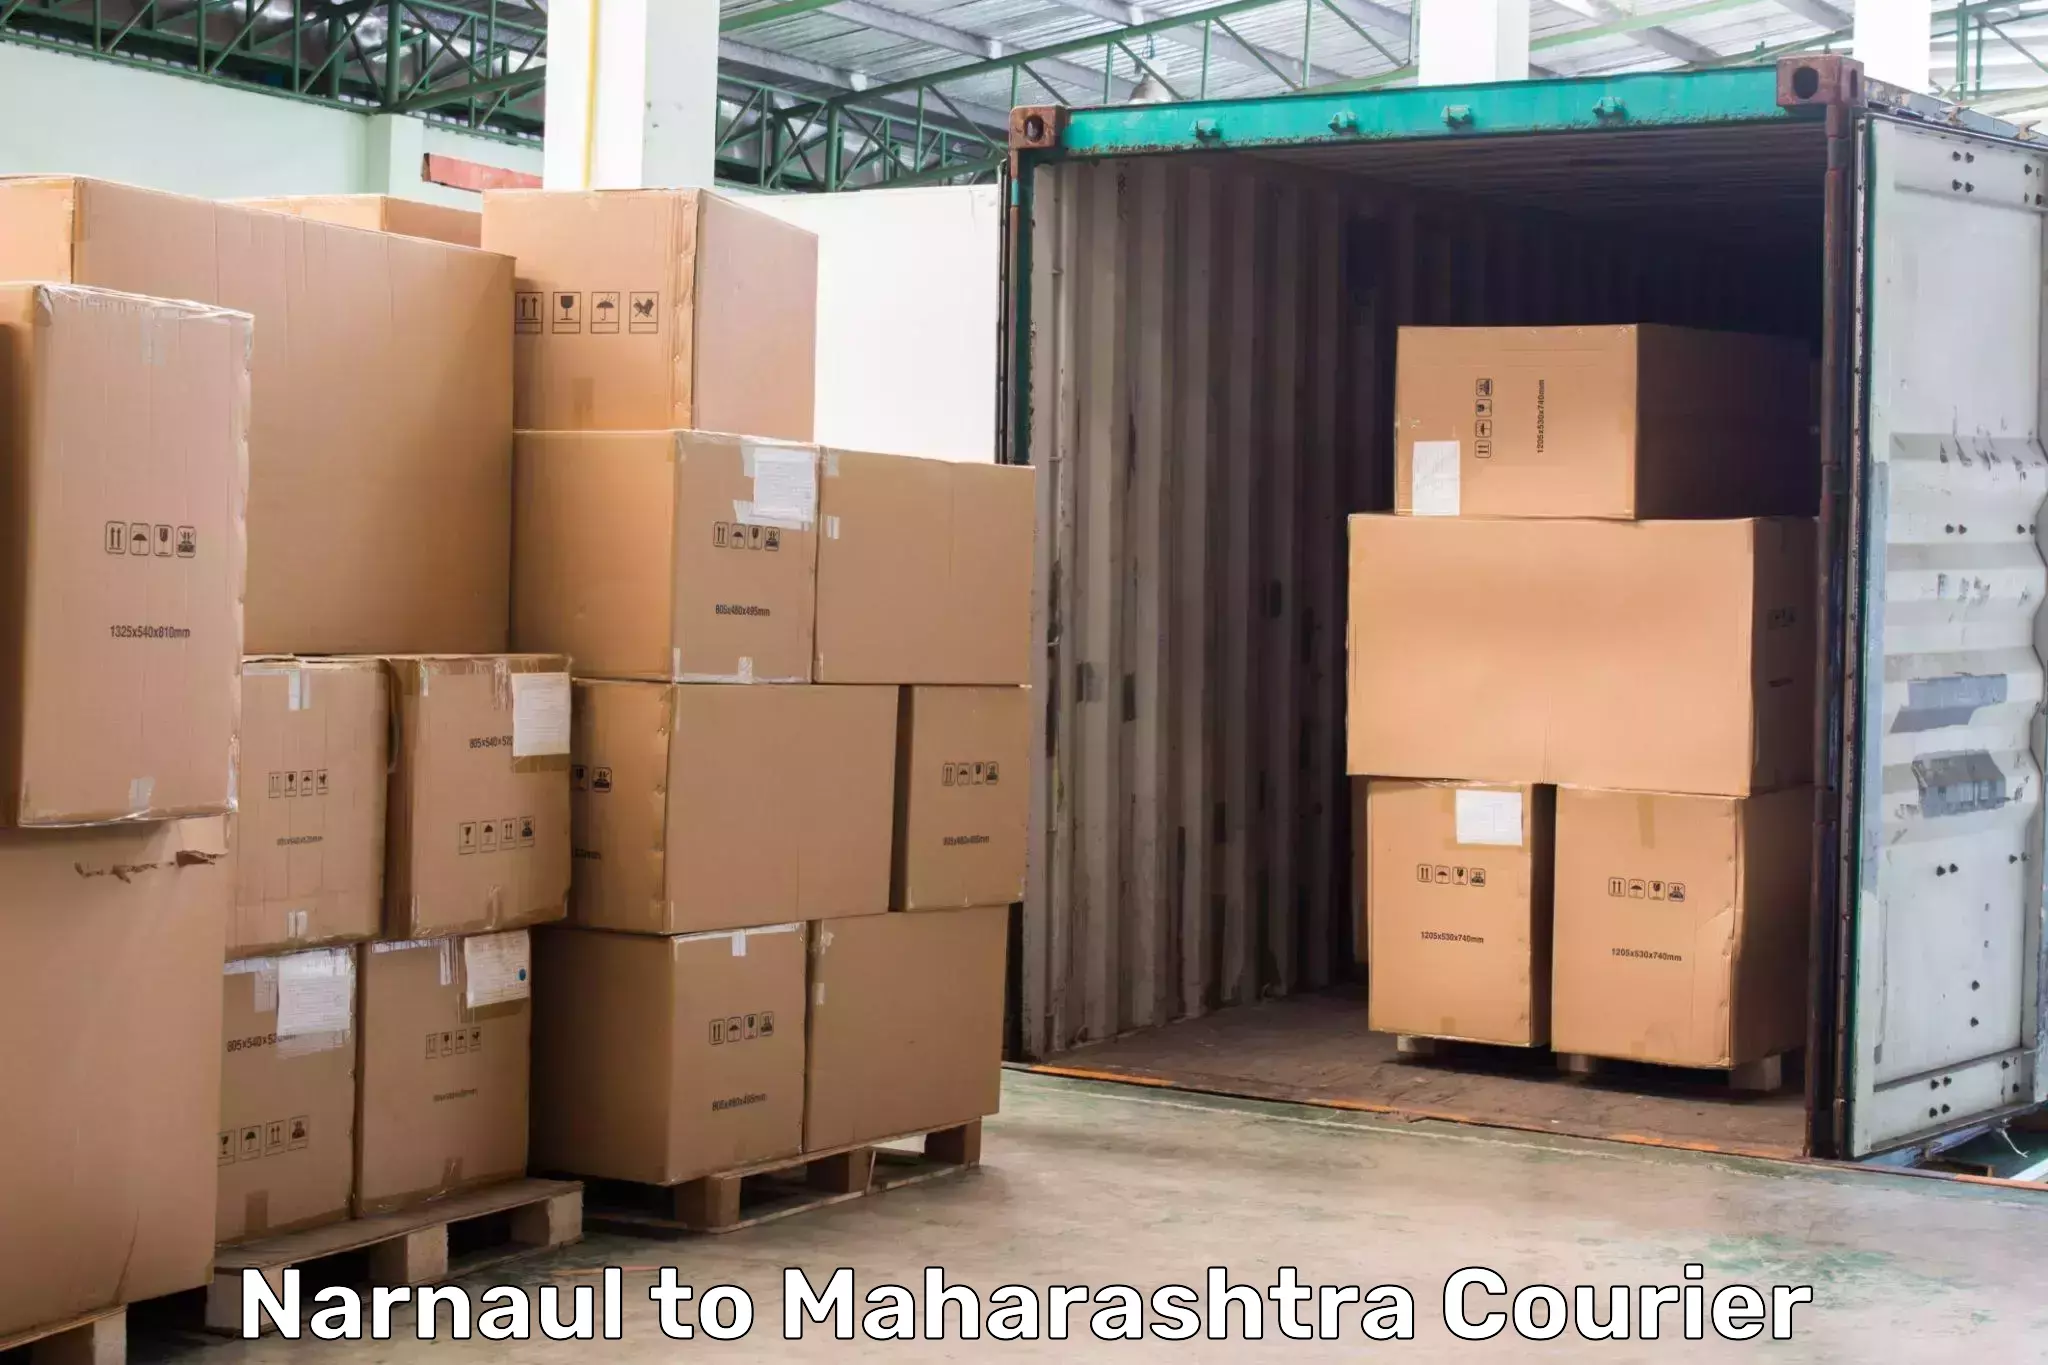 Global freight services Narnaul to Sangli